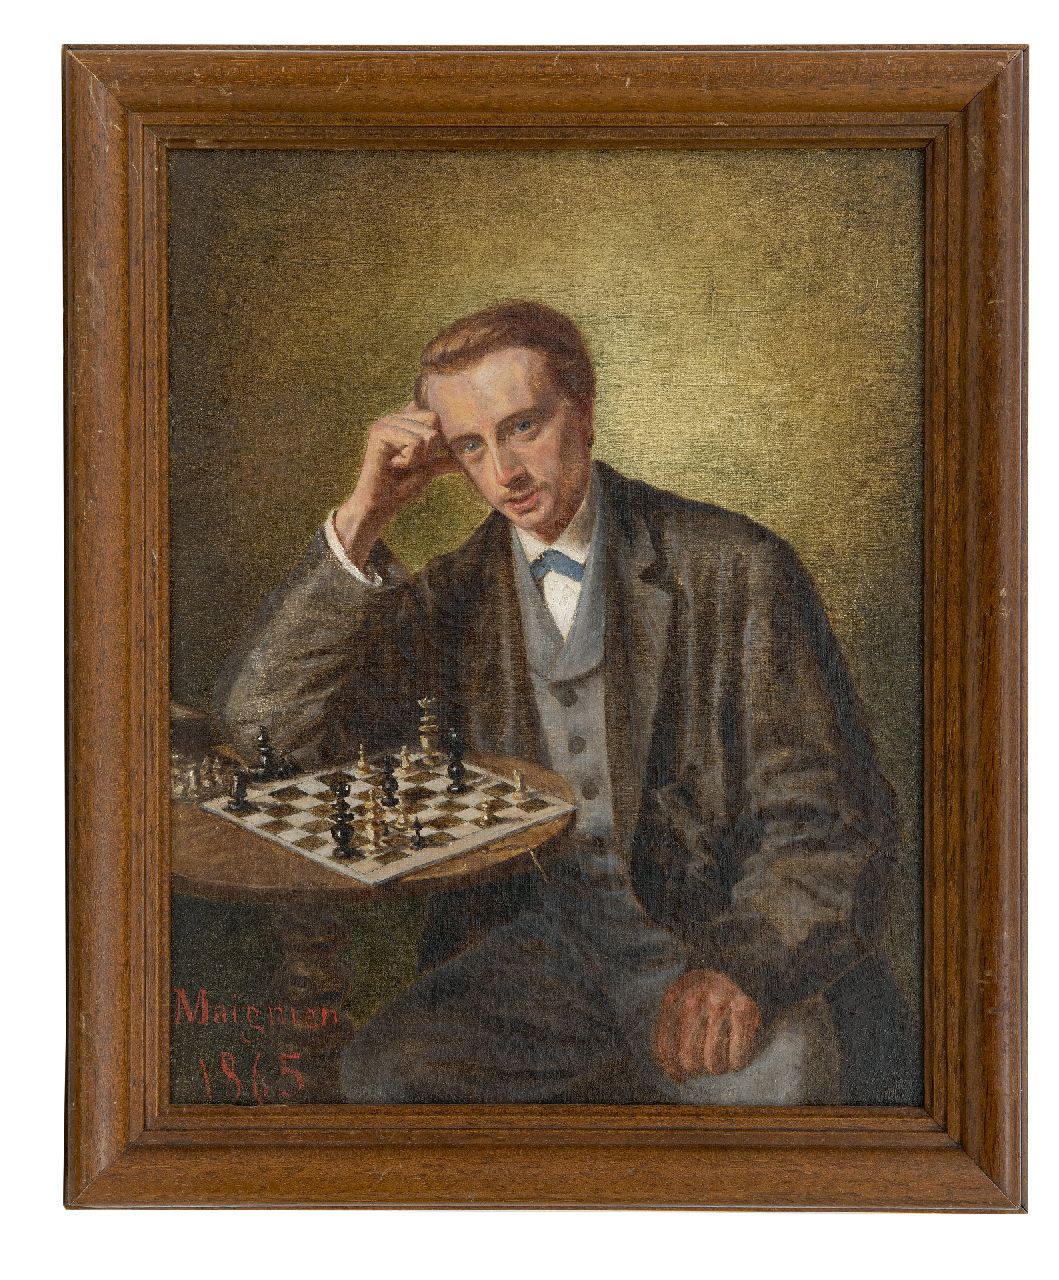 Maignien   | Maignien | Paintings offered for sale | The chess player, oil on canvas laid down on panel 30.5 x 24.2 cm, signed l.l. and dated 1865